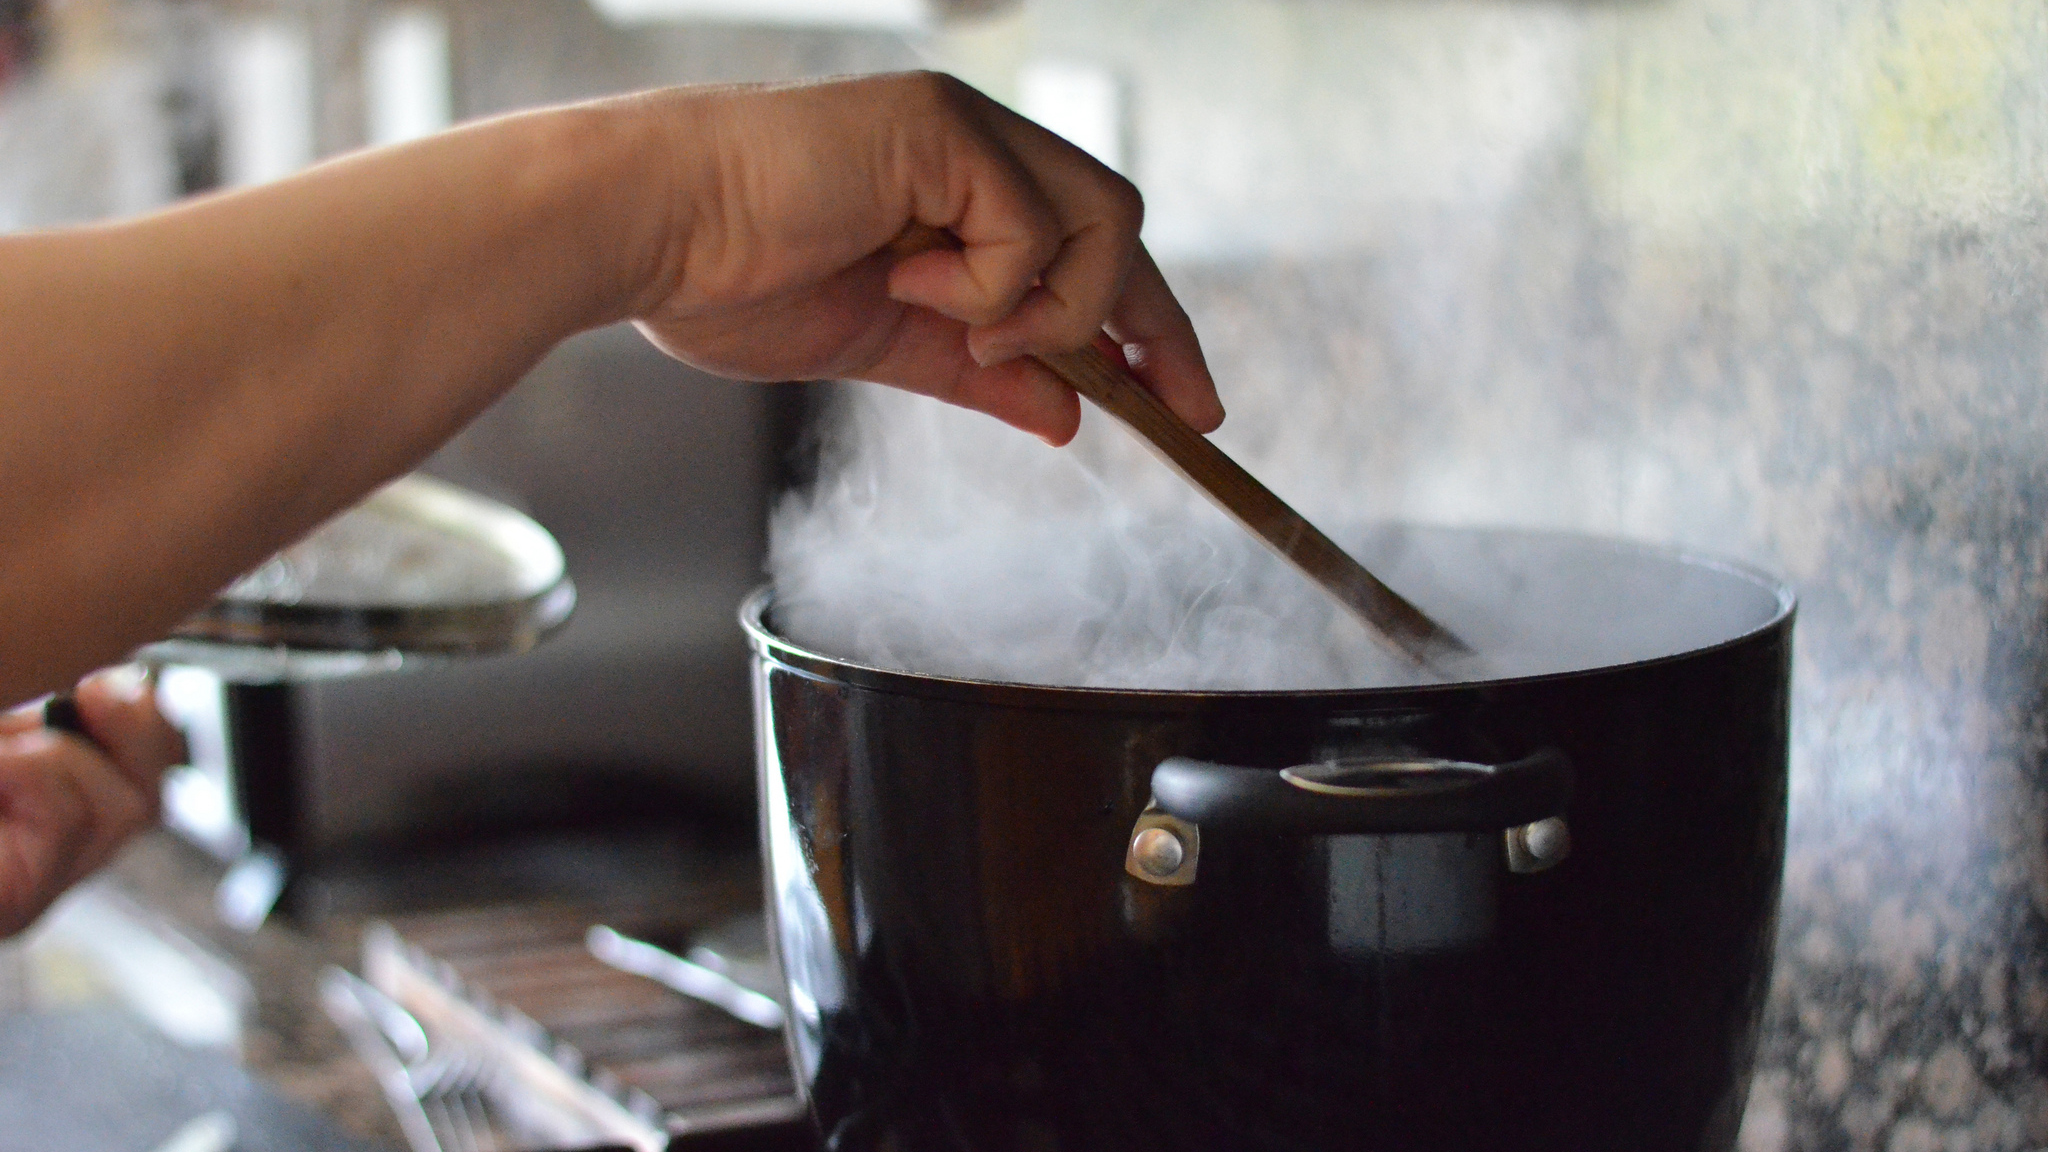 How I Conquered My Fear Of Cooking And Got Comfortable In The Kitchen